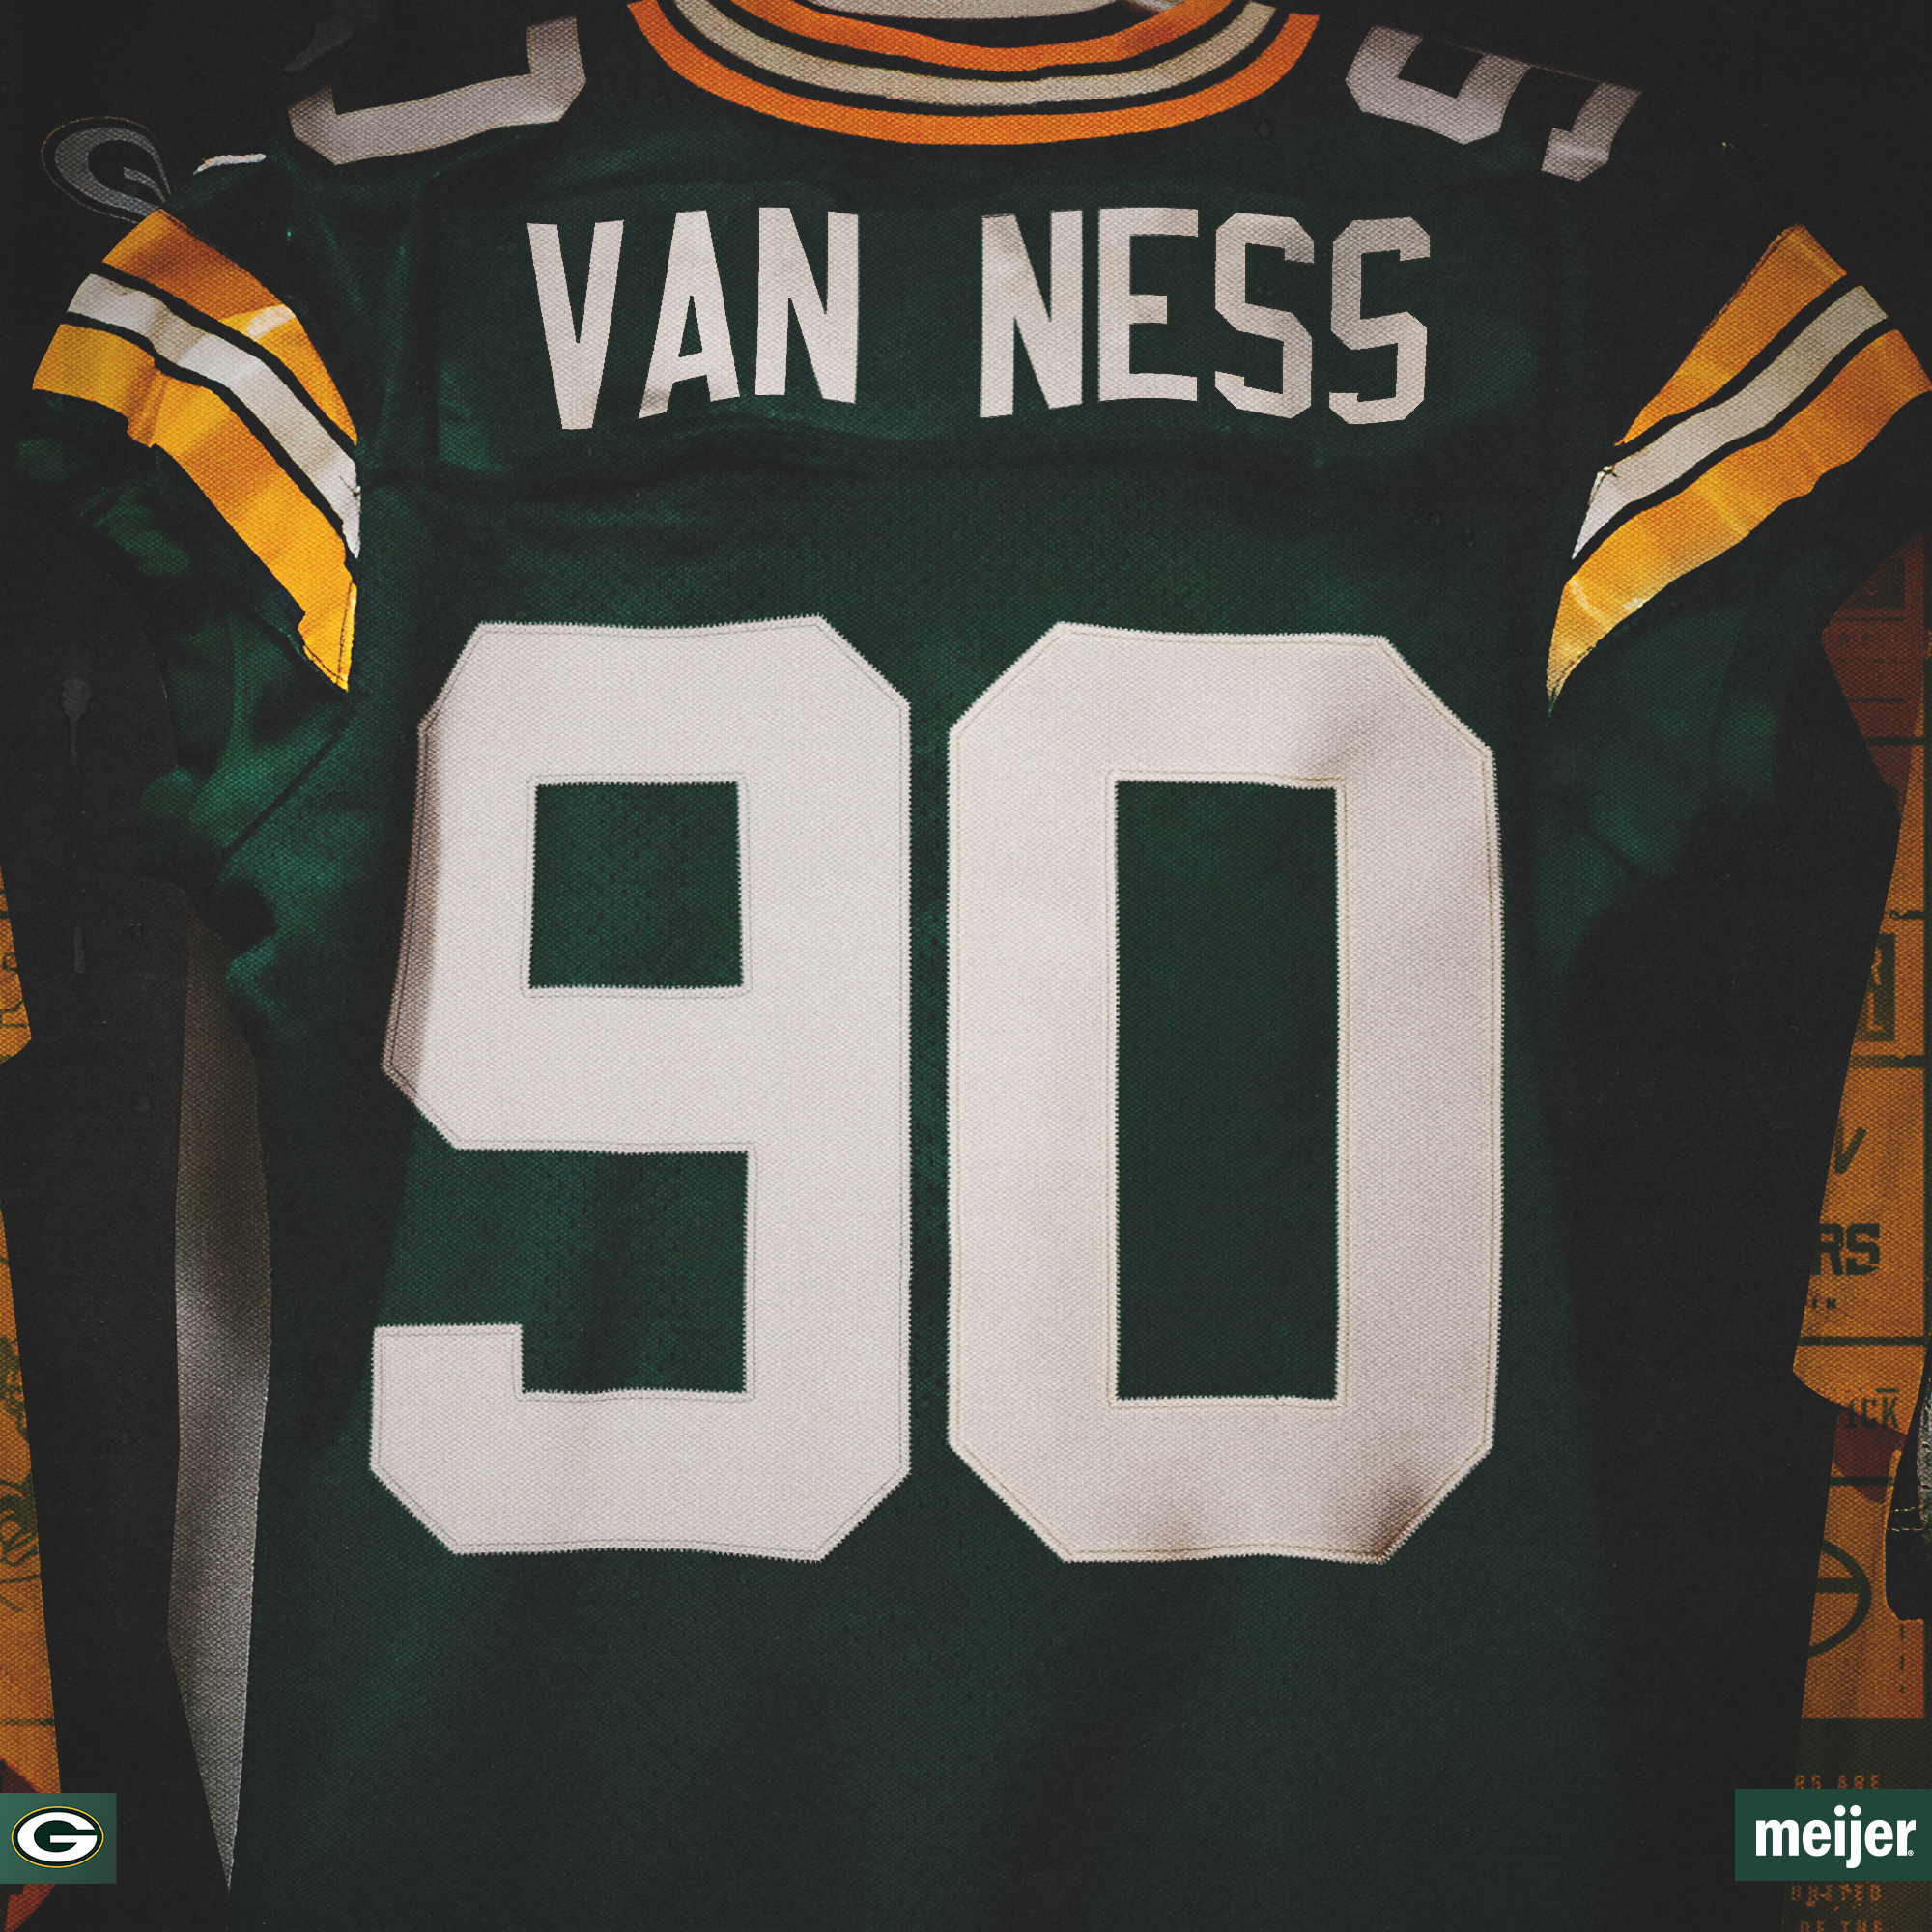 green bay packers jersey font